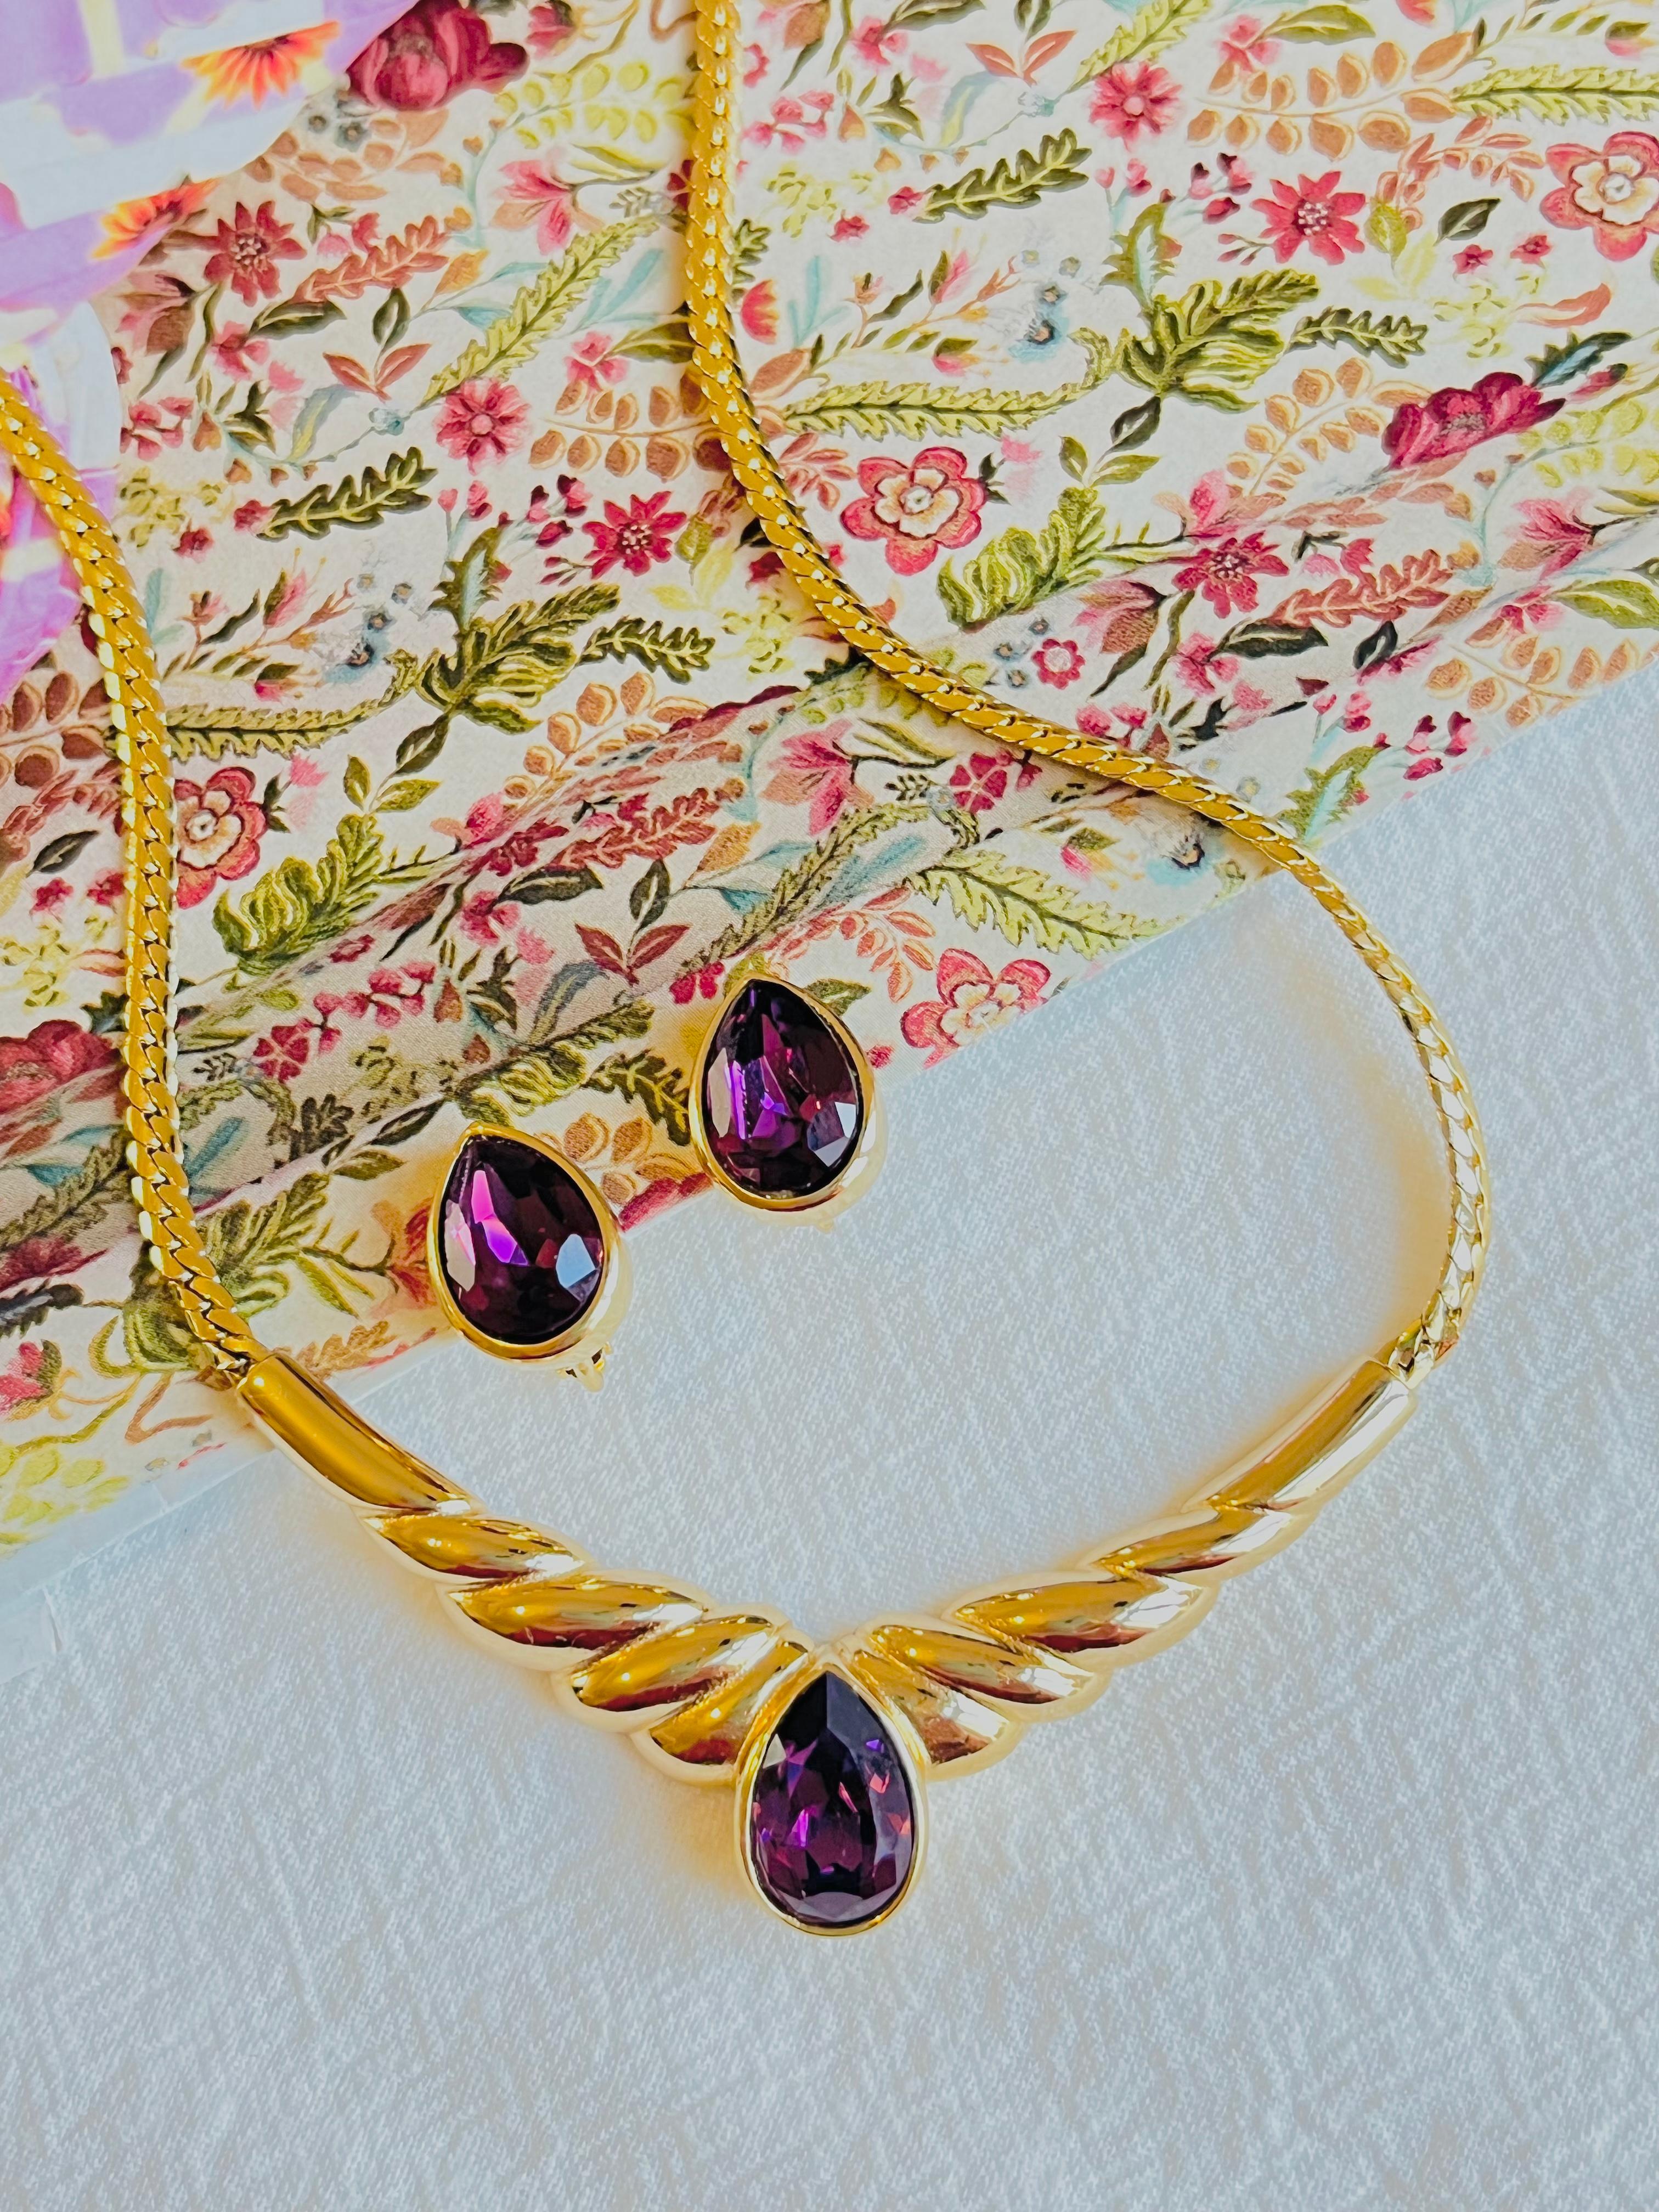 Christian Dior Vintage 1980s Purple Amethyst Tear Drop Gift Set Necklace Earrings Gold Tone

Very excellent condition. 100% Genuine. Vintage and rare to find.

Size: Necklace: 32 cm, extend chain: 2 cm. pendant: 6.5*1.7 cm. Earrings: 1.6*1.1